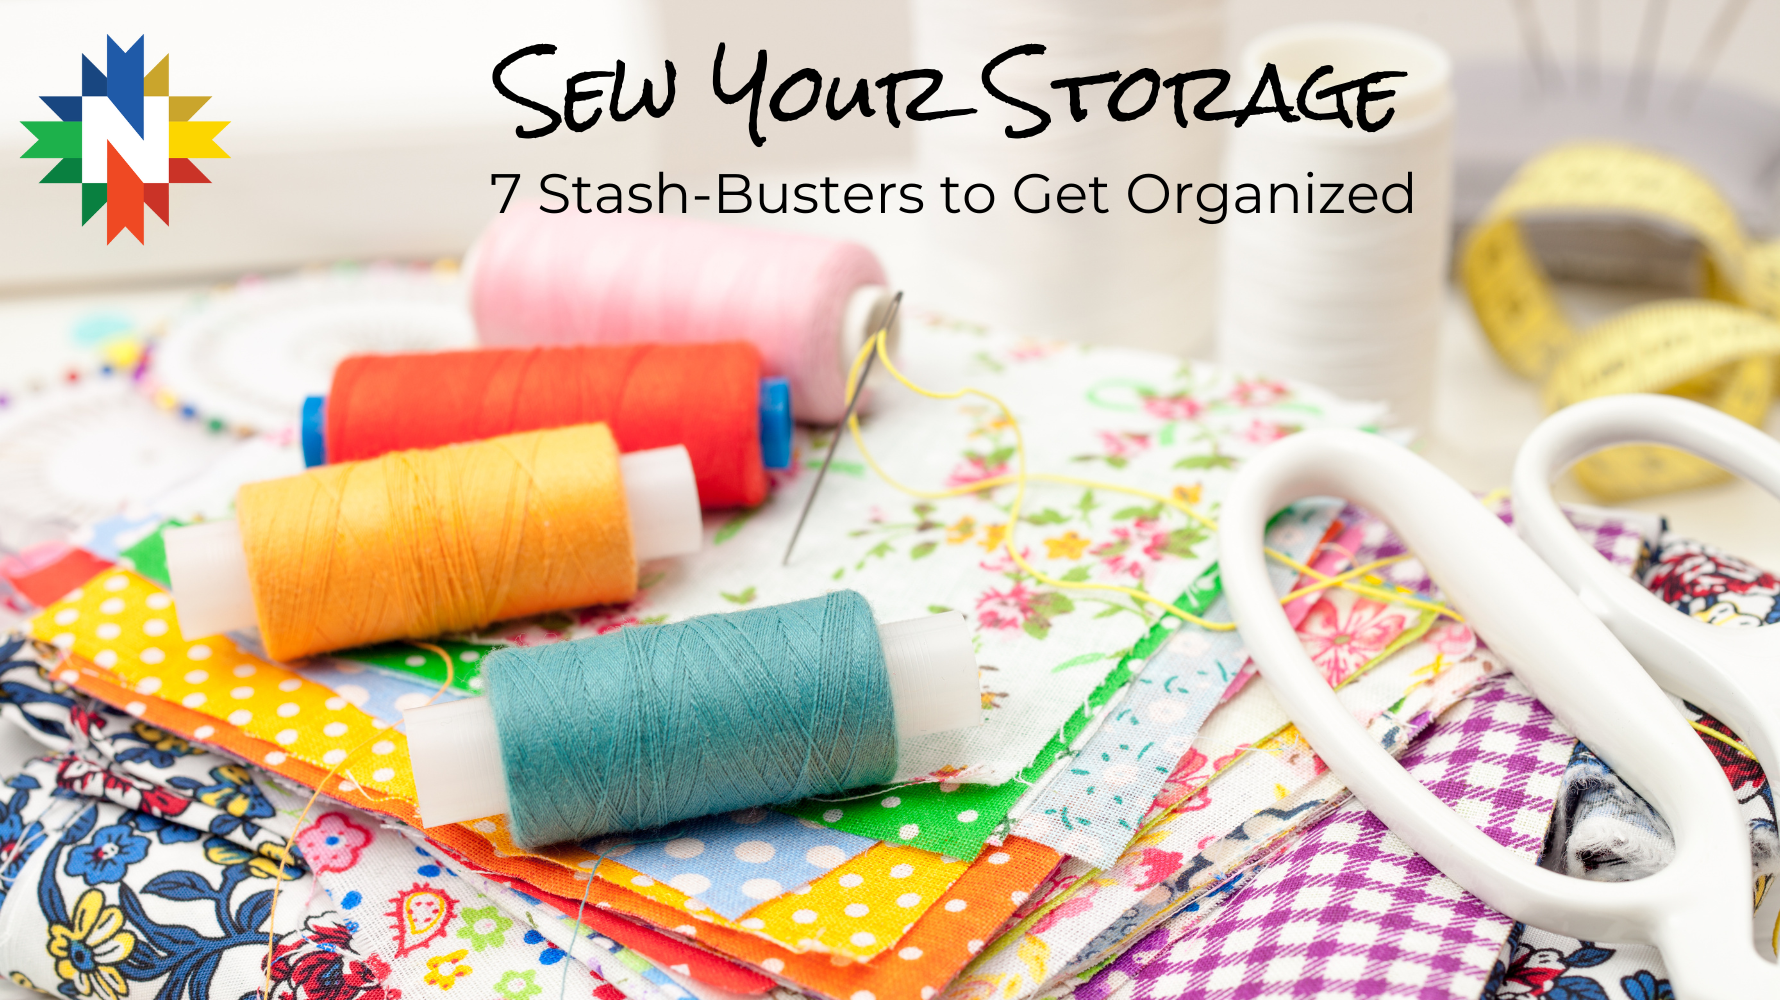 Sew it Yourself: 7 Stash-Busters to Get Organized